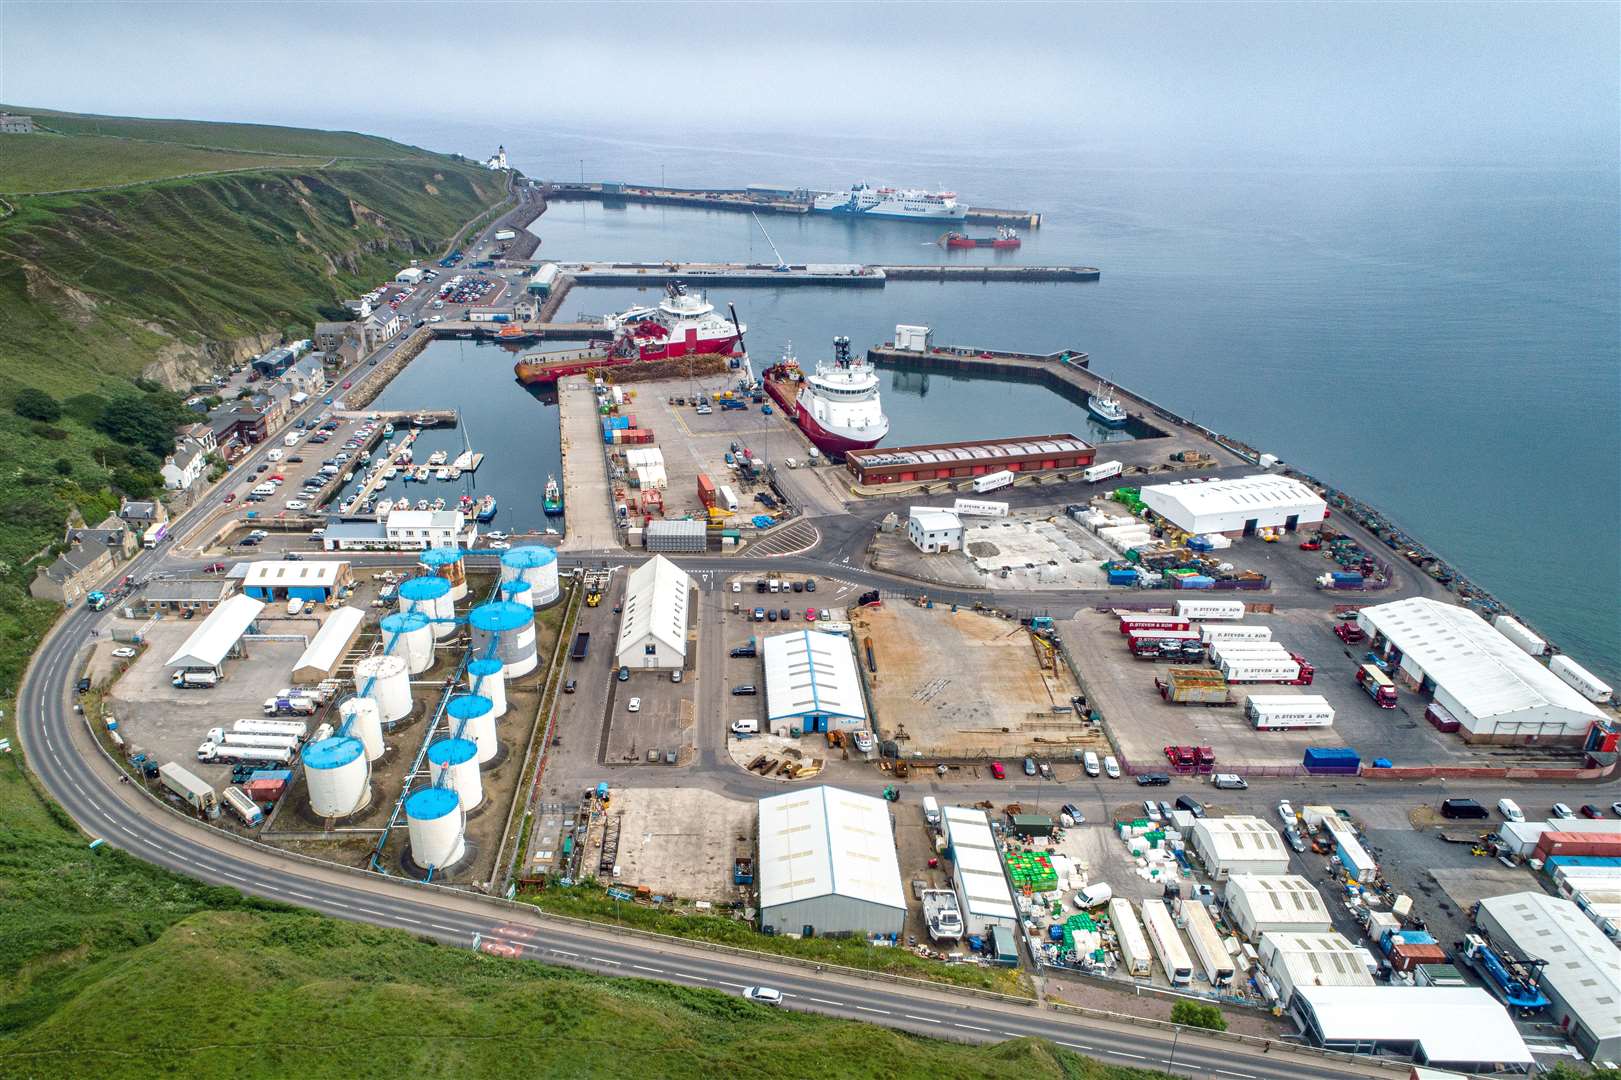 The incident took place at Scrabster Harbour.